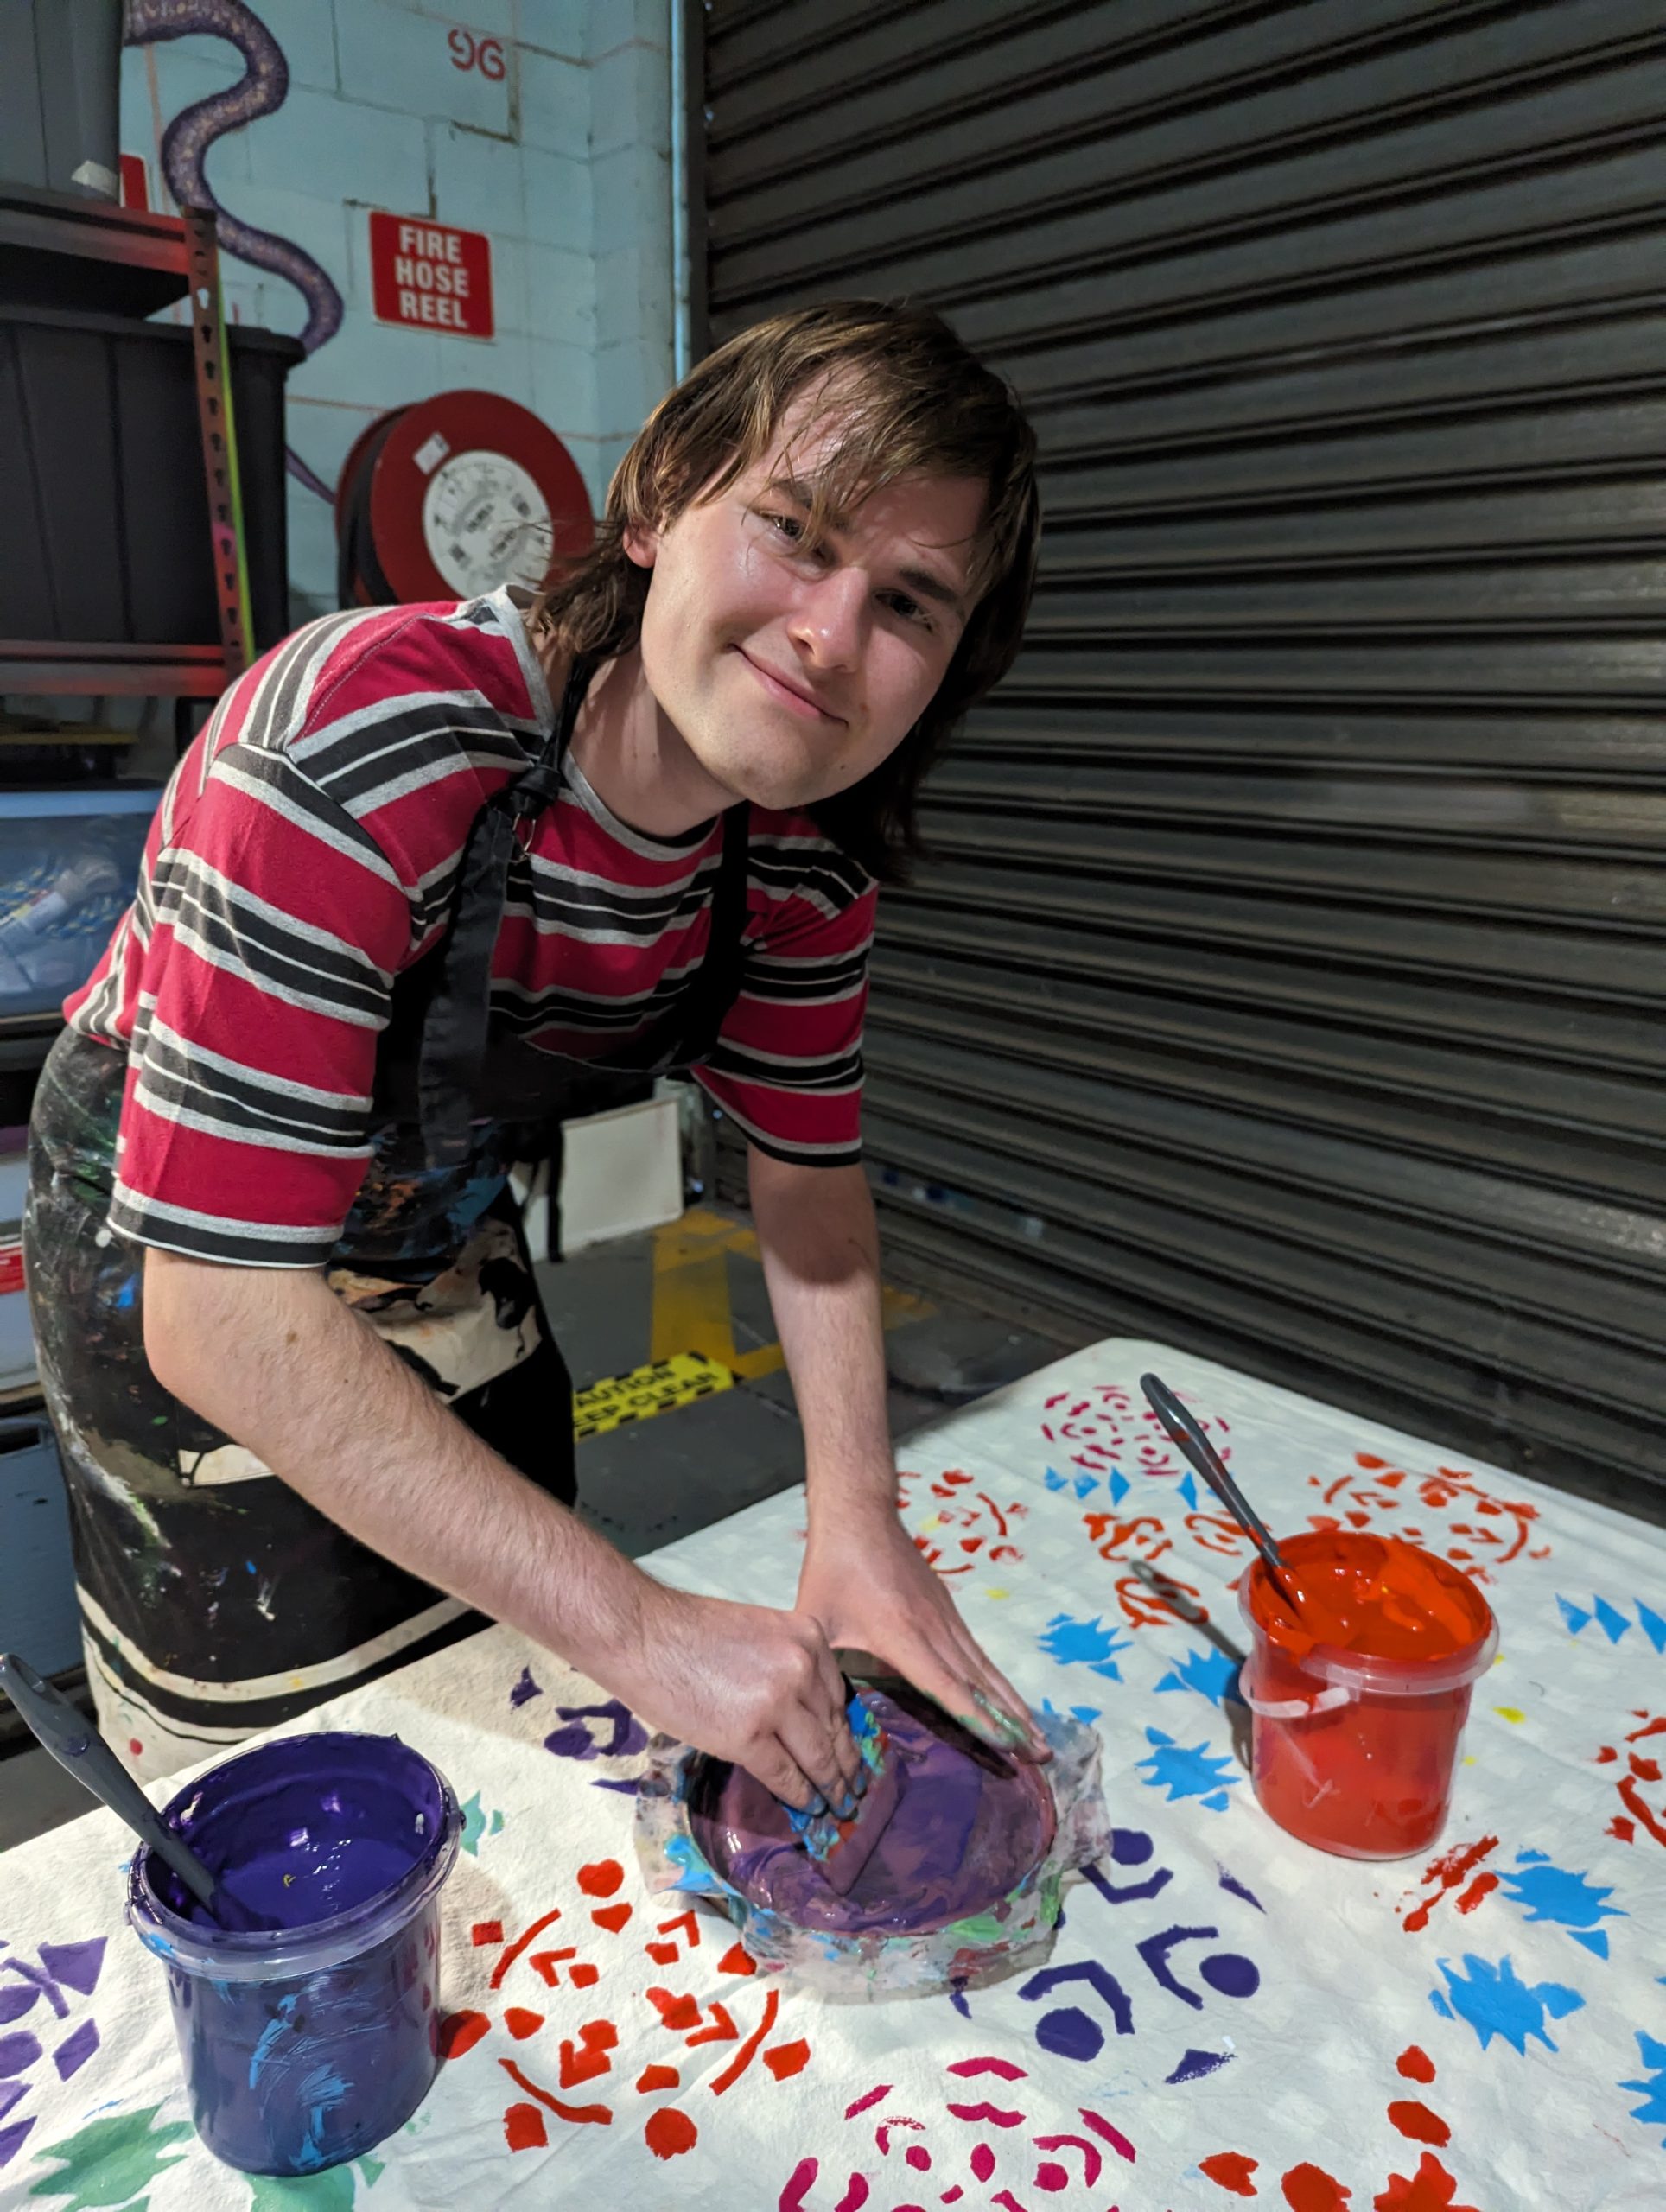 young person creating artwork